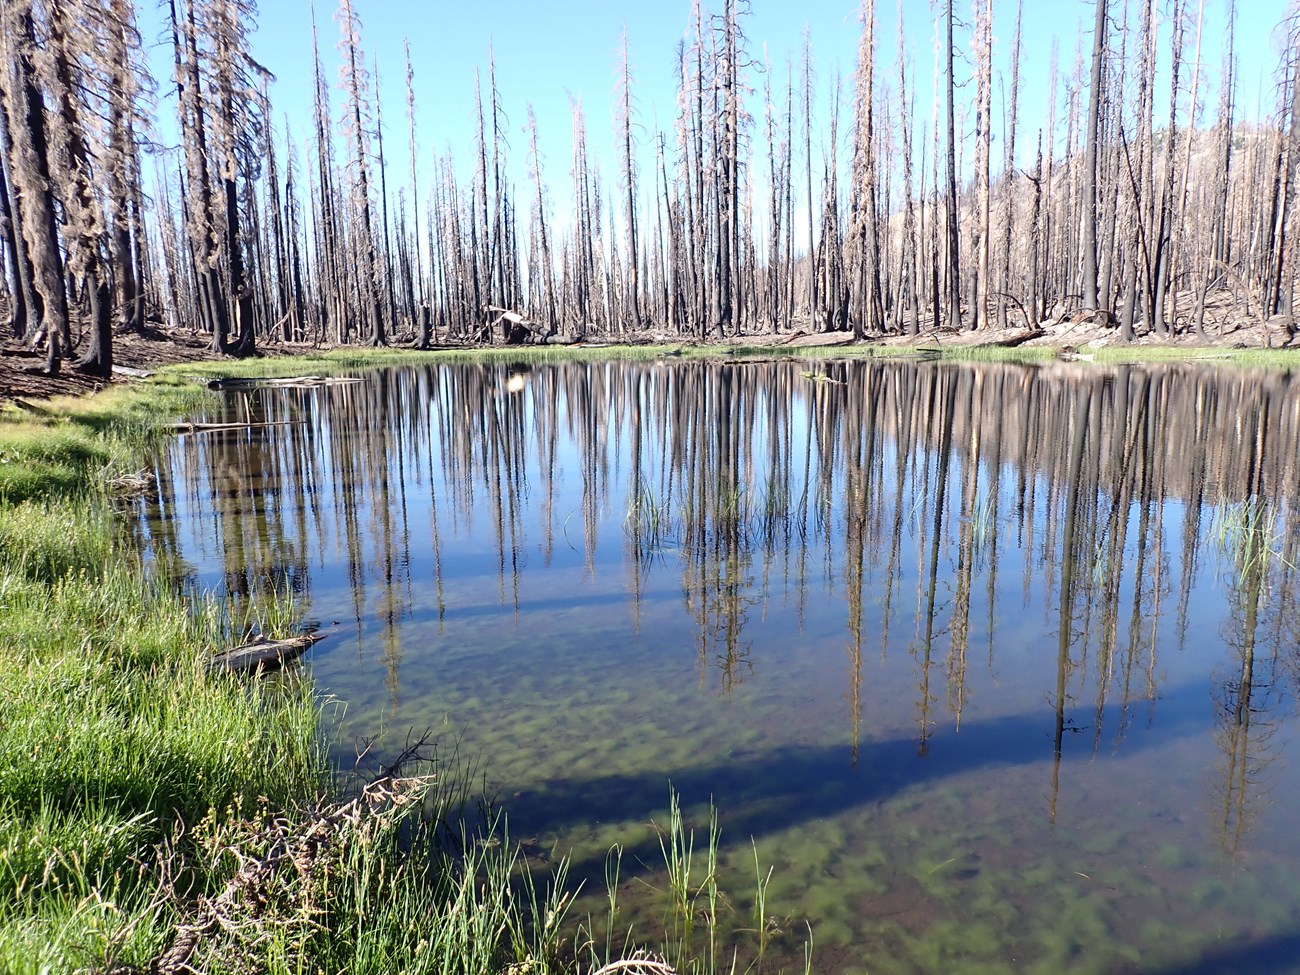 Shallow high mountain pond surrounded by dead trees.